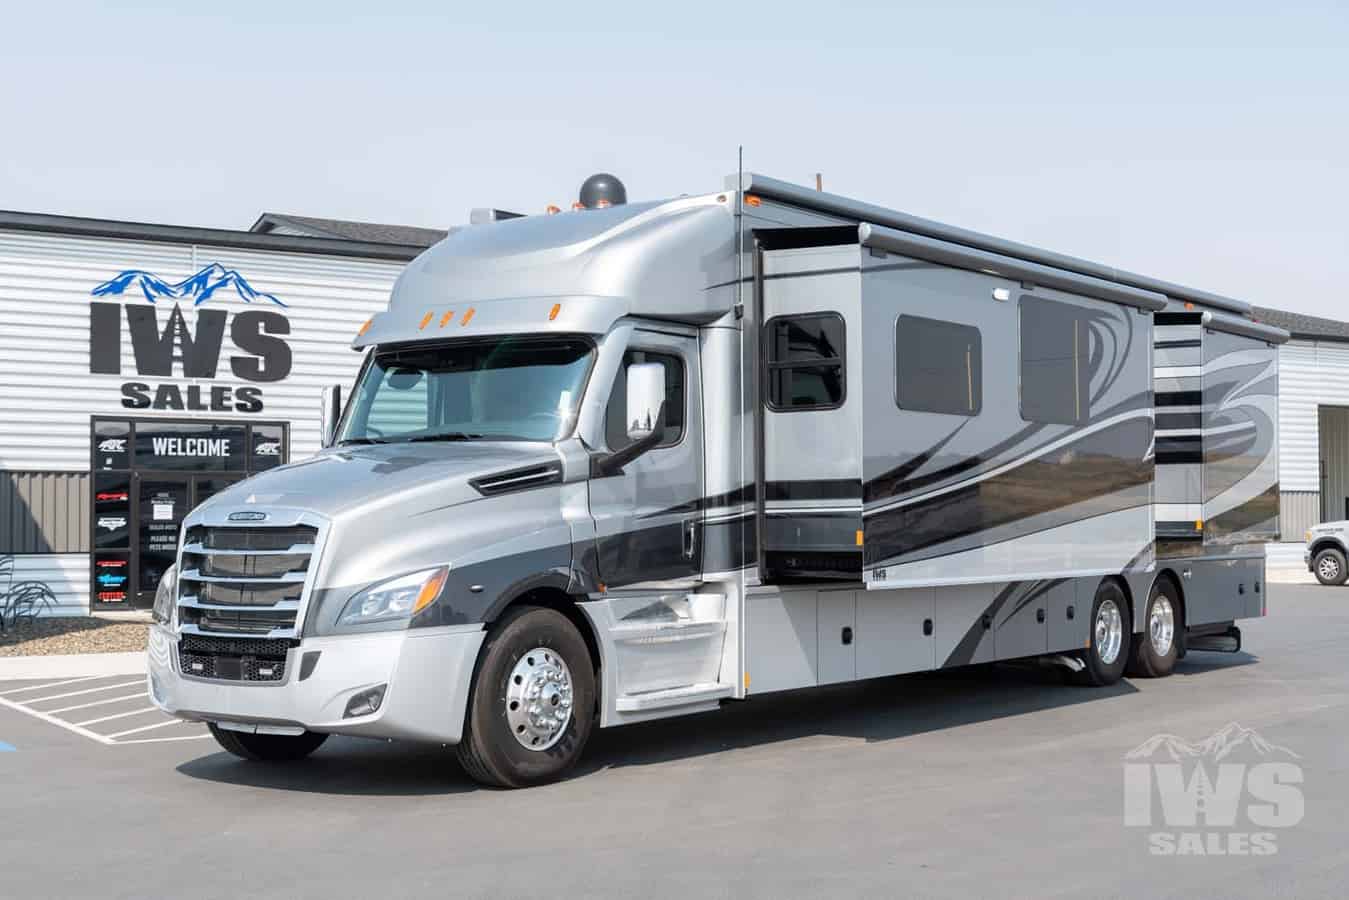 Class C Sel Rv With A Garage